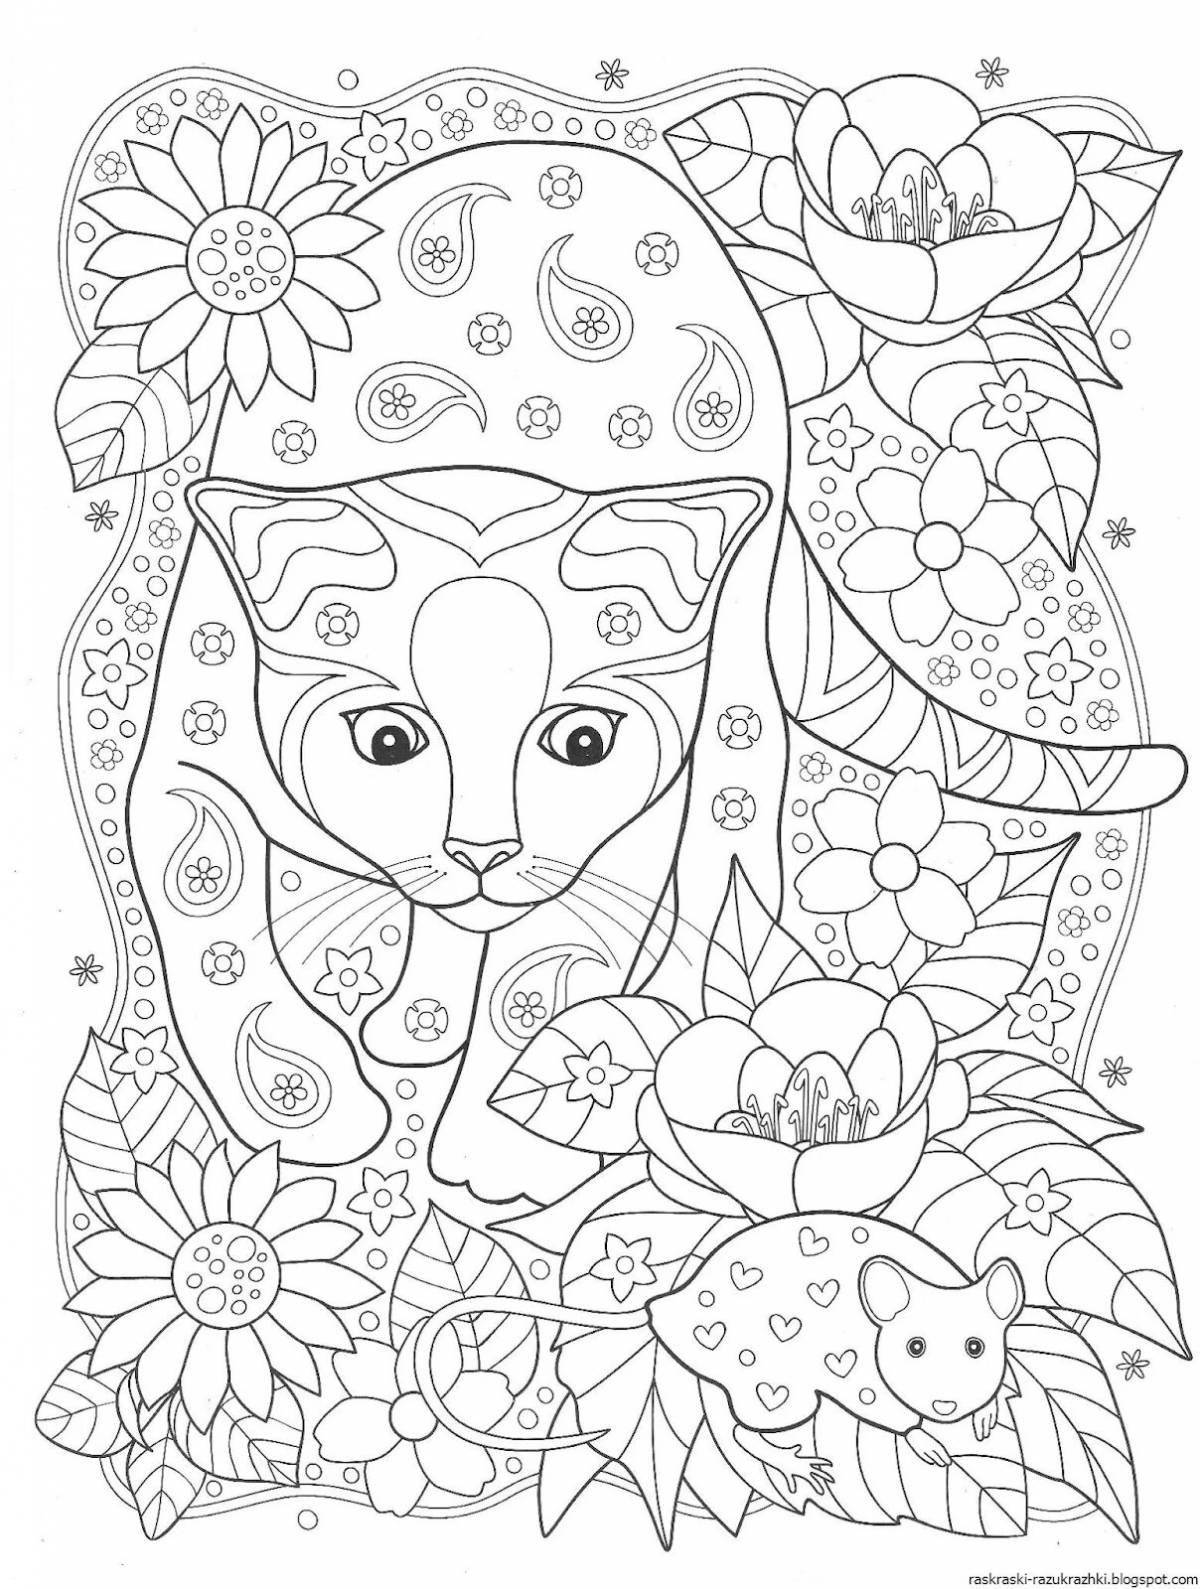 Colourful anti-stress coloring book for children 8 years old